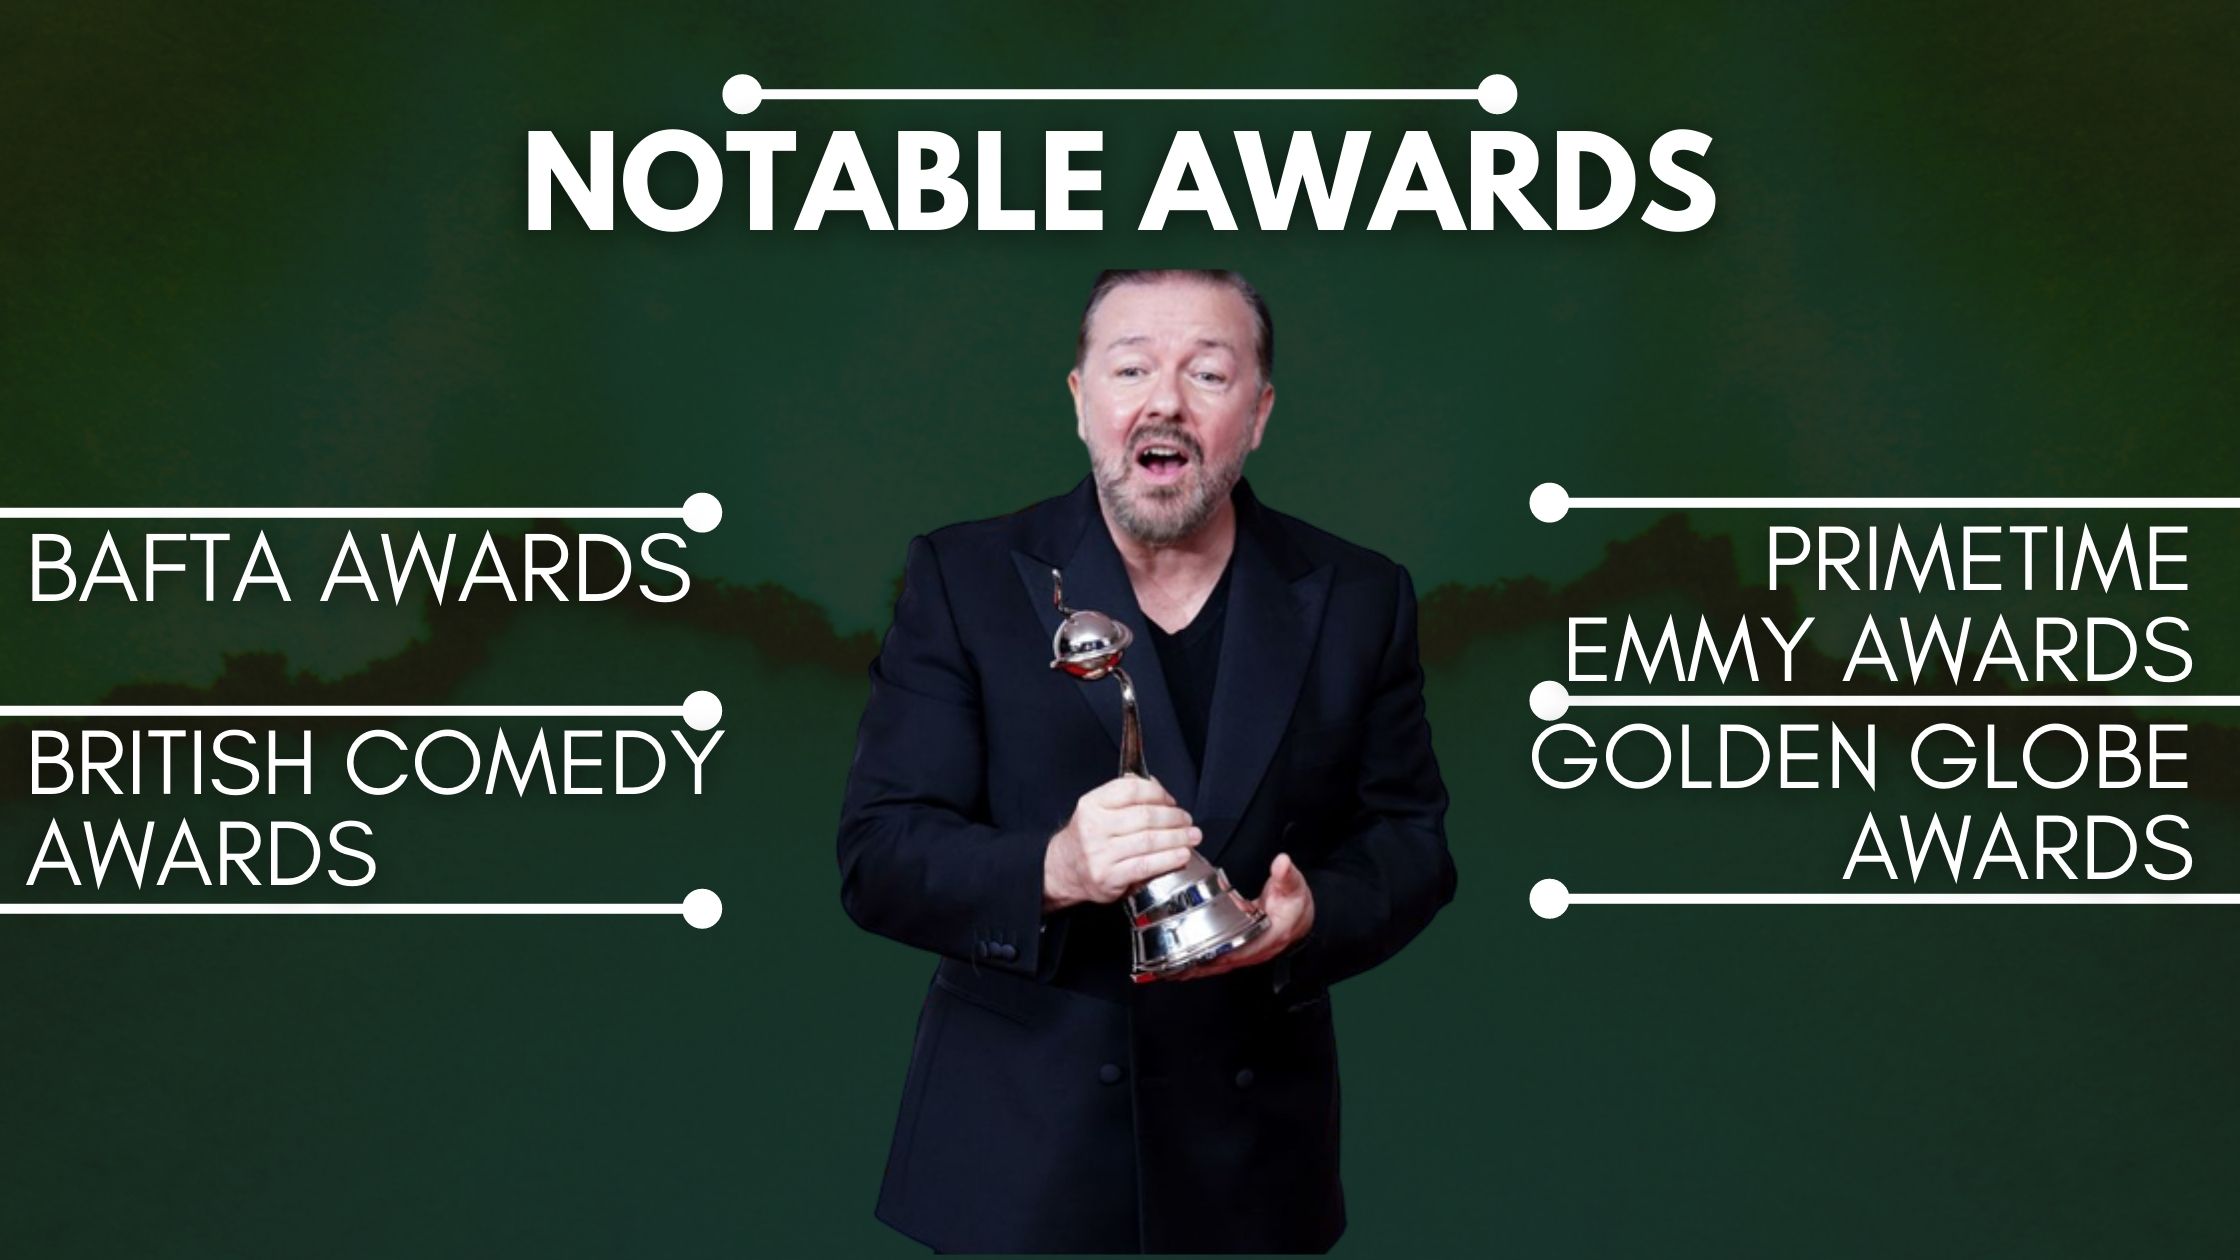 Ricky Gervais Net Worth and Biography